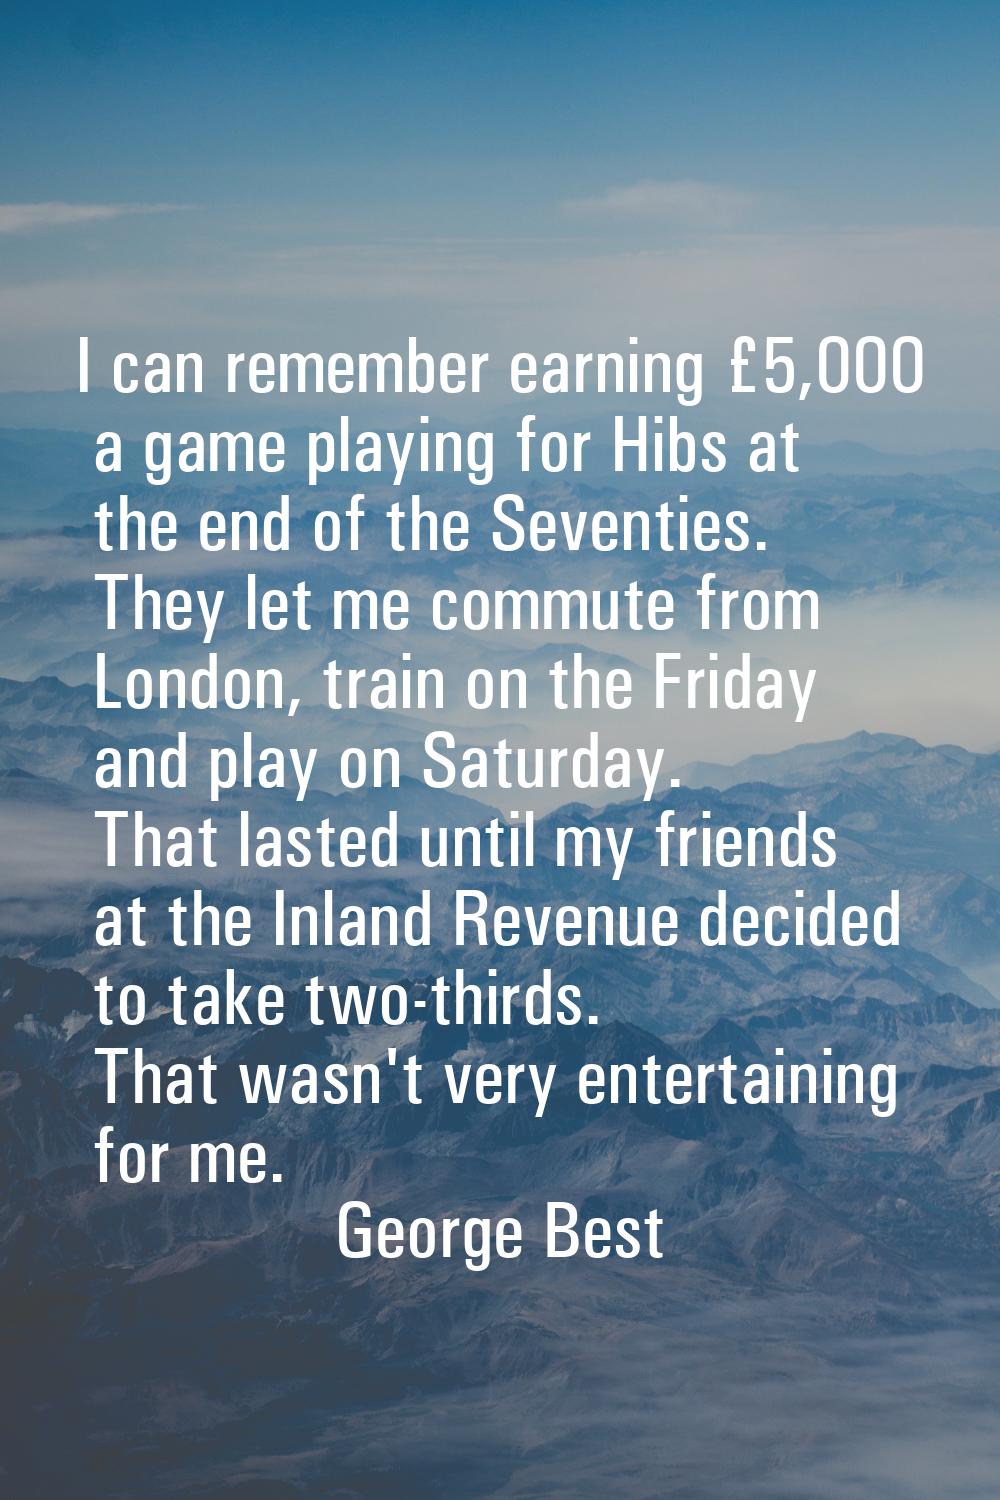 I can remember earning £5,000 a game playing for Hibs at the end of the Seventies. They let me comm